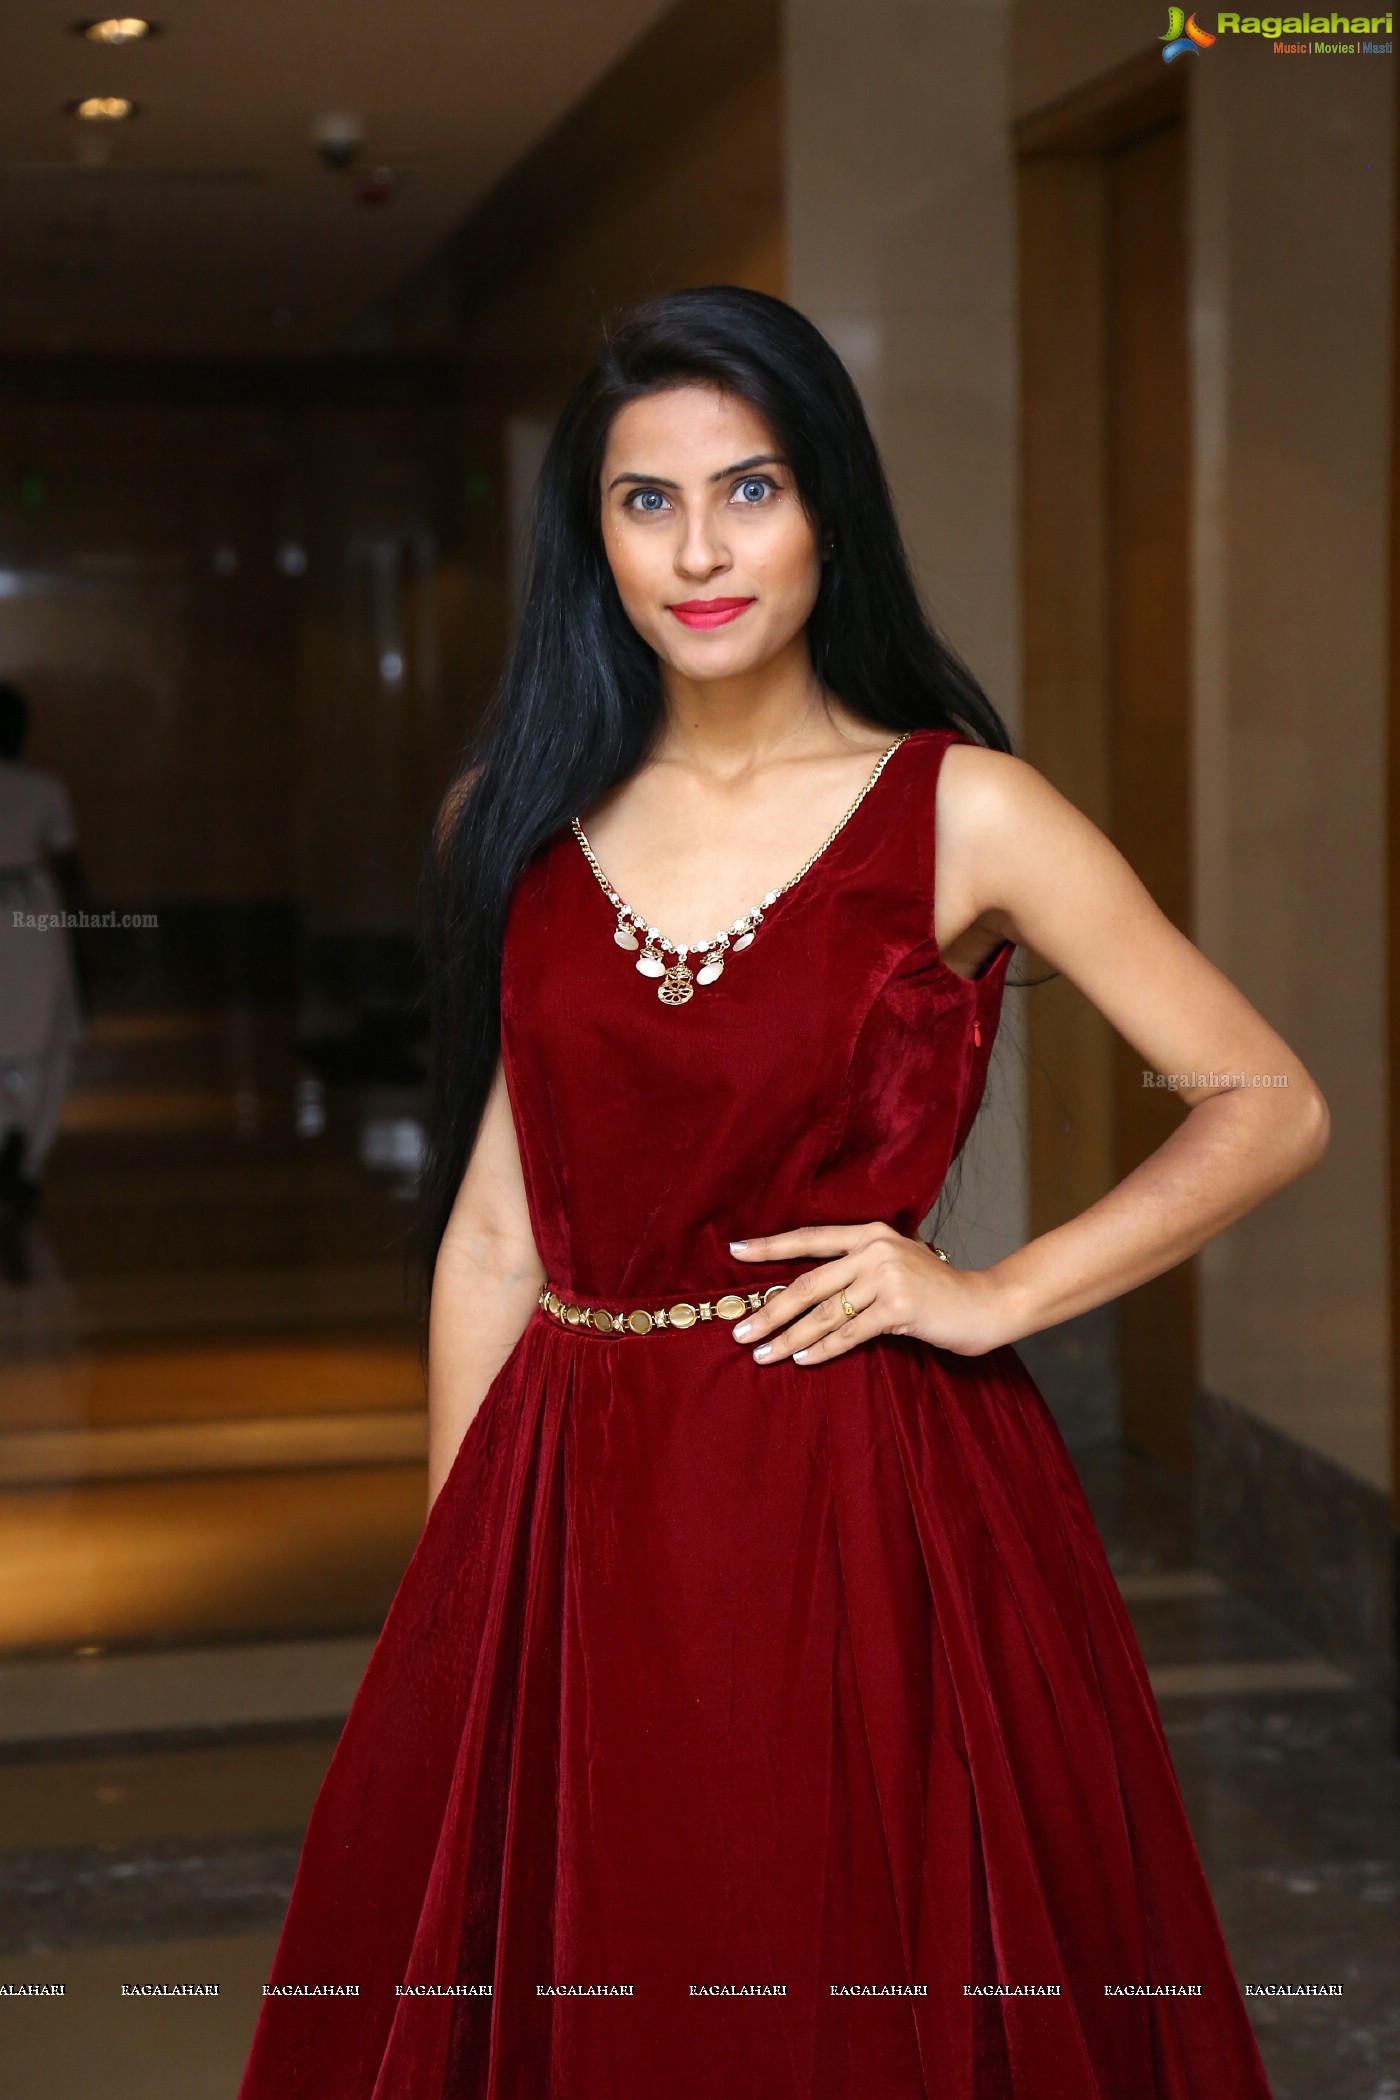 Krupa at Sutraa Designer Fashion Exhibition 2018 (Posters)